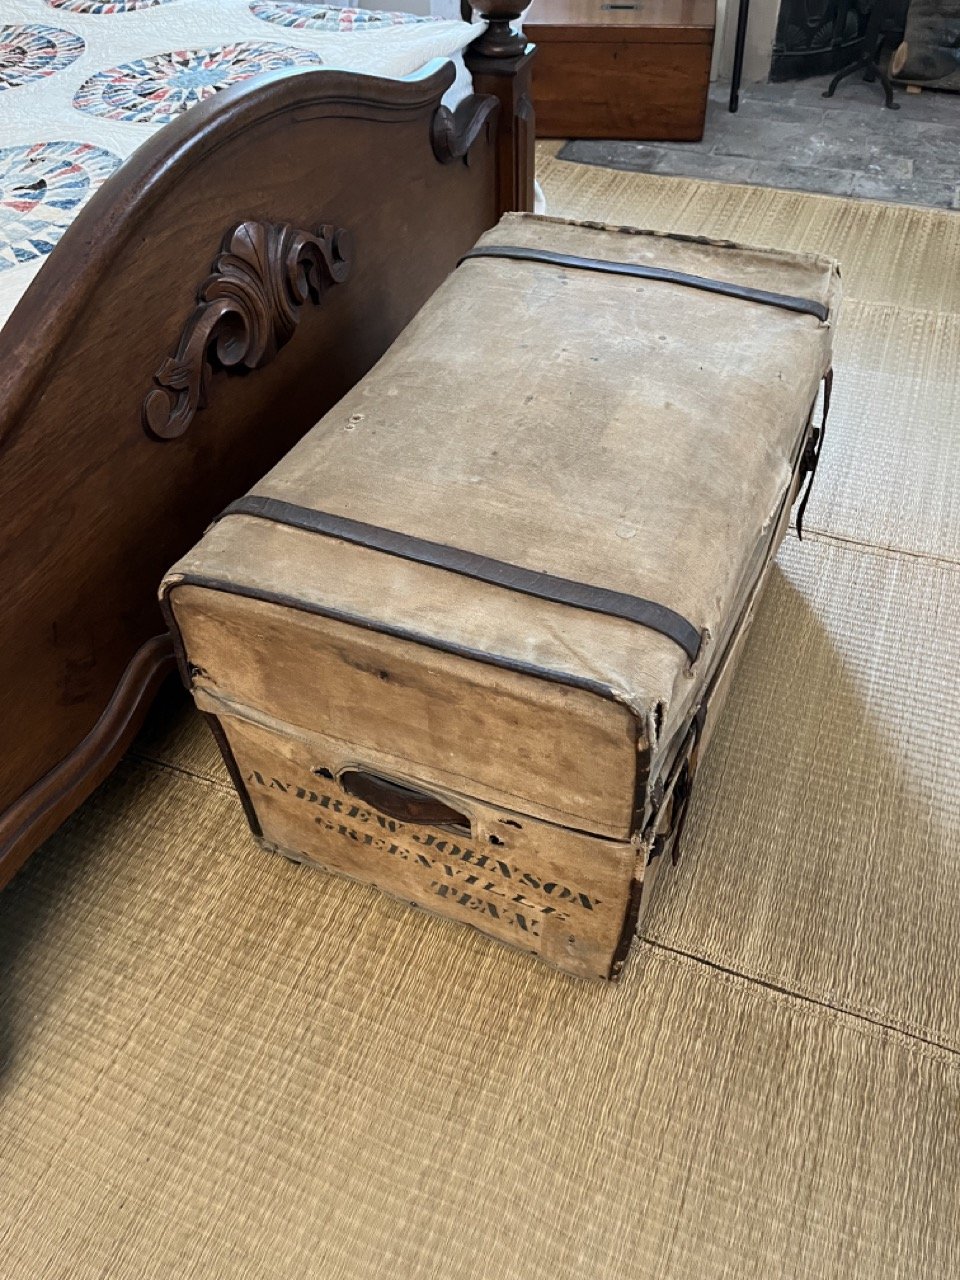 Presidents Johnson's travel trunk he used for years.